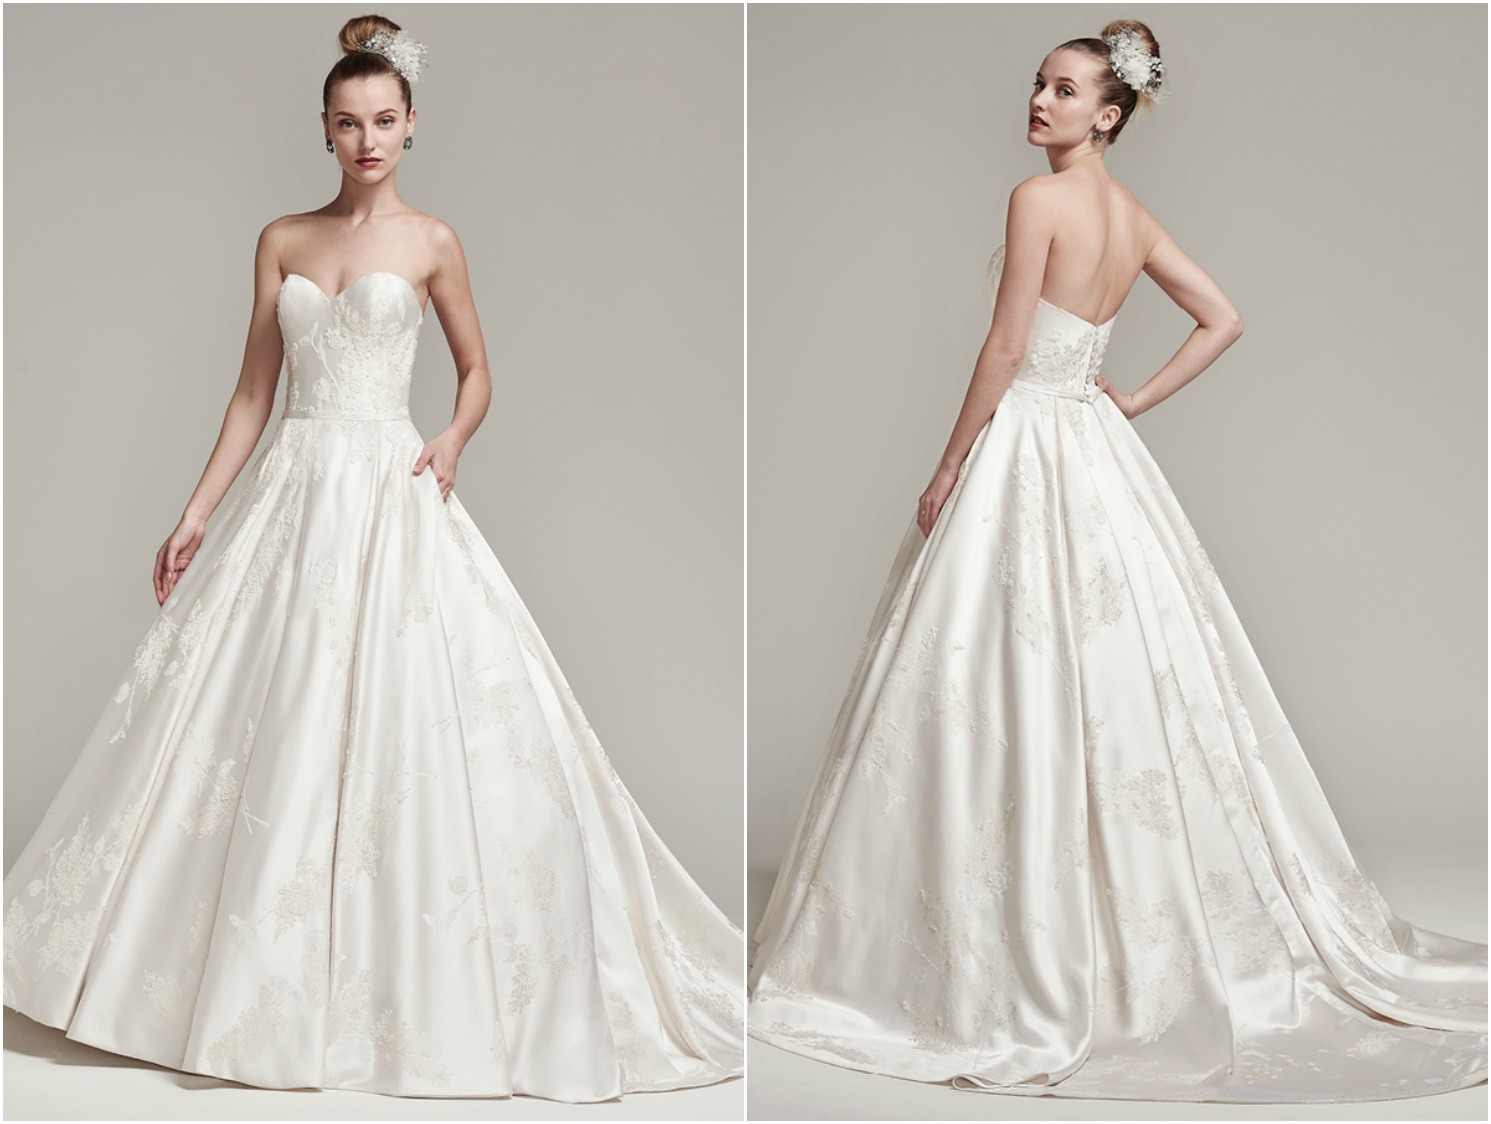 Dramatically structured, this luxurious brocade ball gown, with sweetheart neckline, pockets and natural waist, features lightly beaded details and belt. Finished with a stunning full train and covered buttons over zipper and inner elastic closure. 

<a href="https://www.maggiesottero.com/sottero-and-midgley/essex/9851" target="_blank">Sottero &amp; Midgley</a>